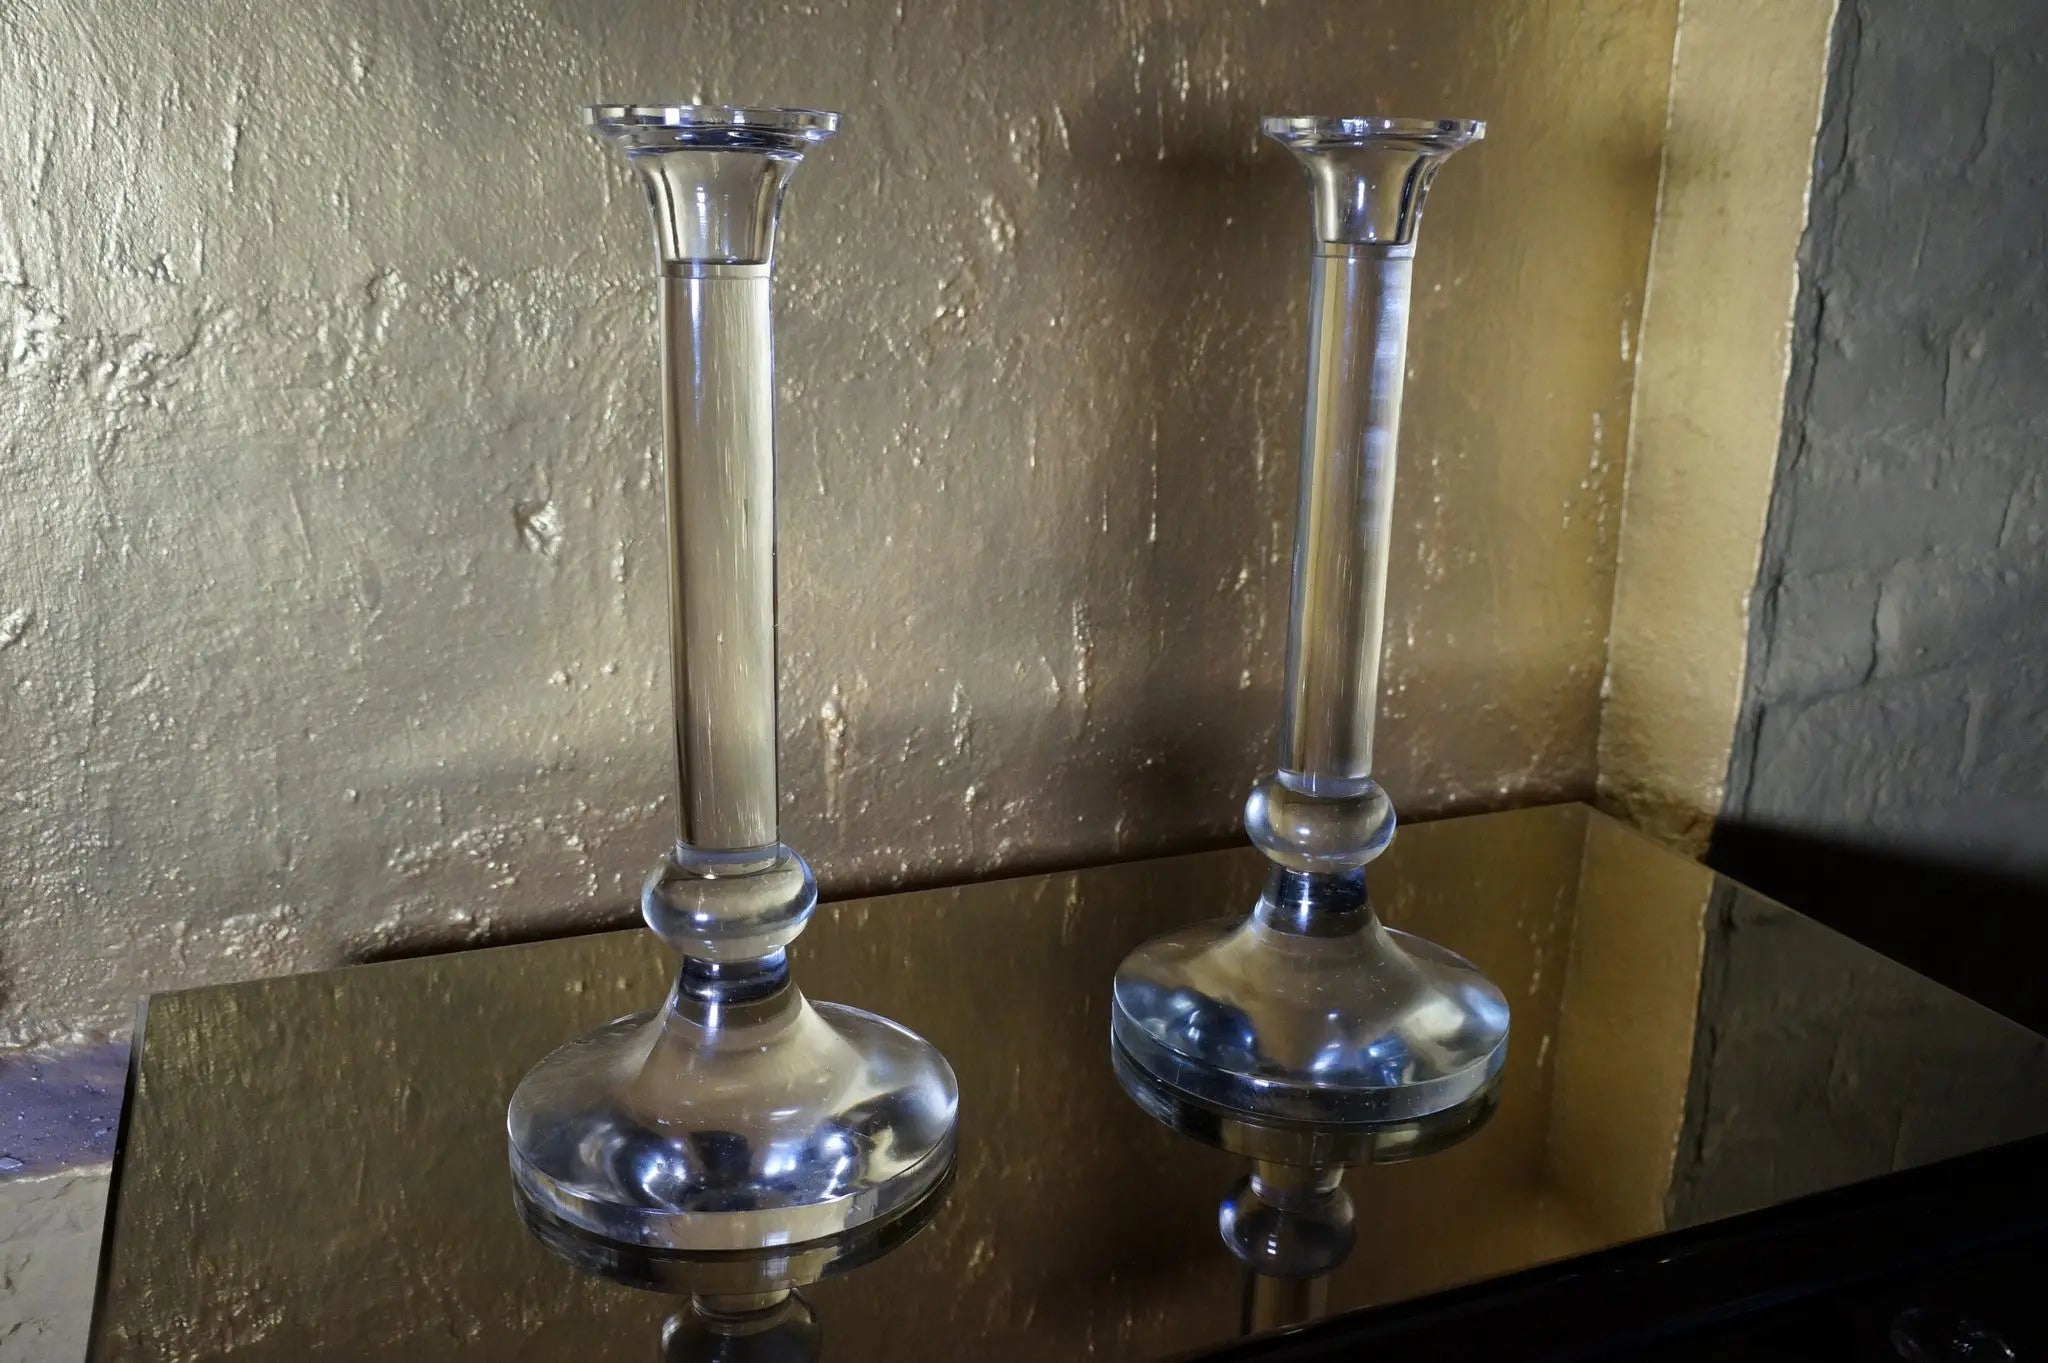 Glass Candle Stands, set of 2 Venetian Design